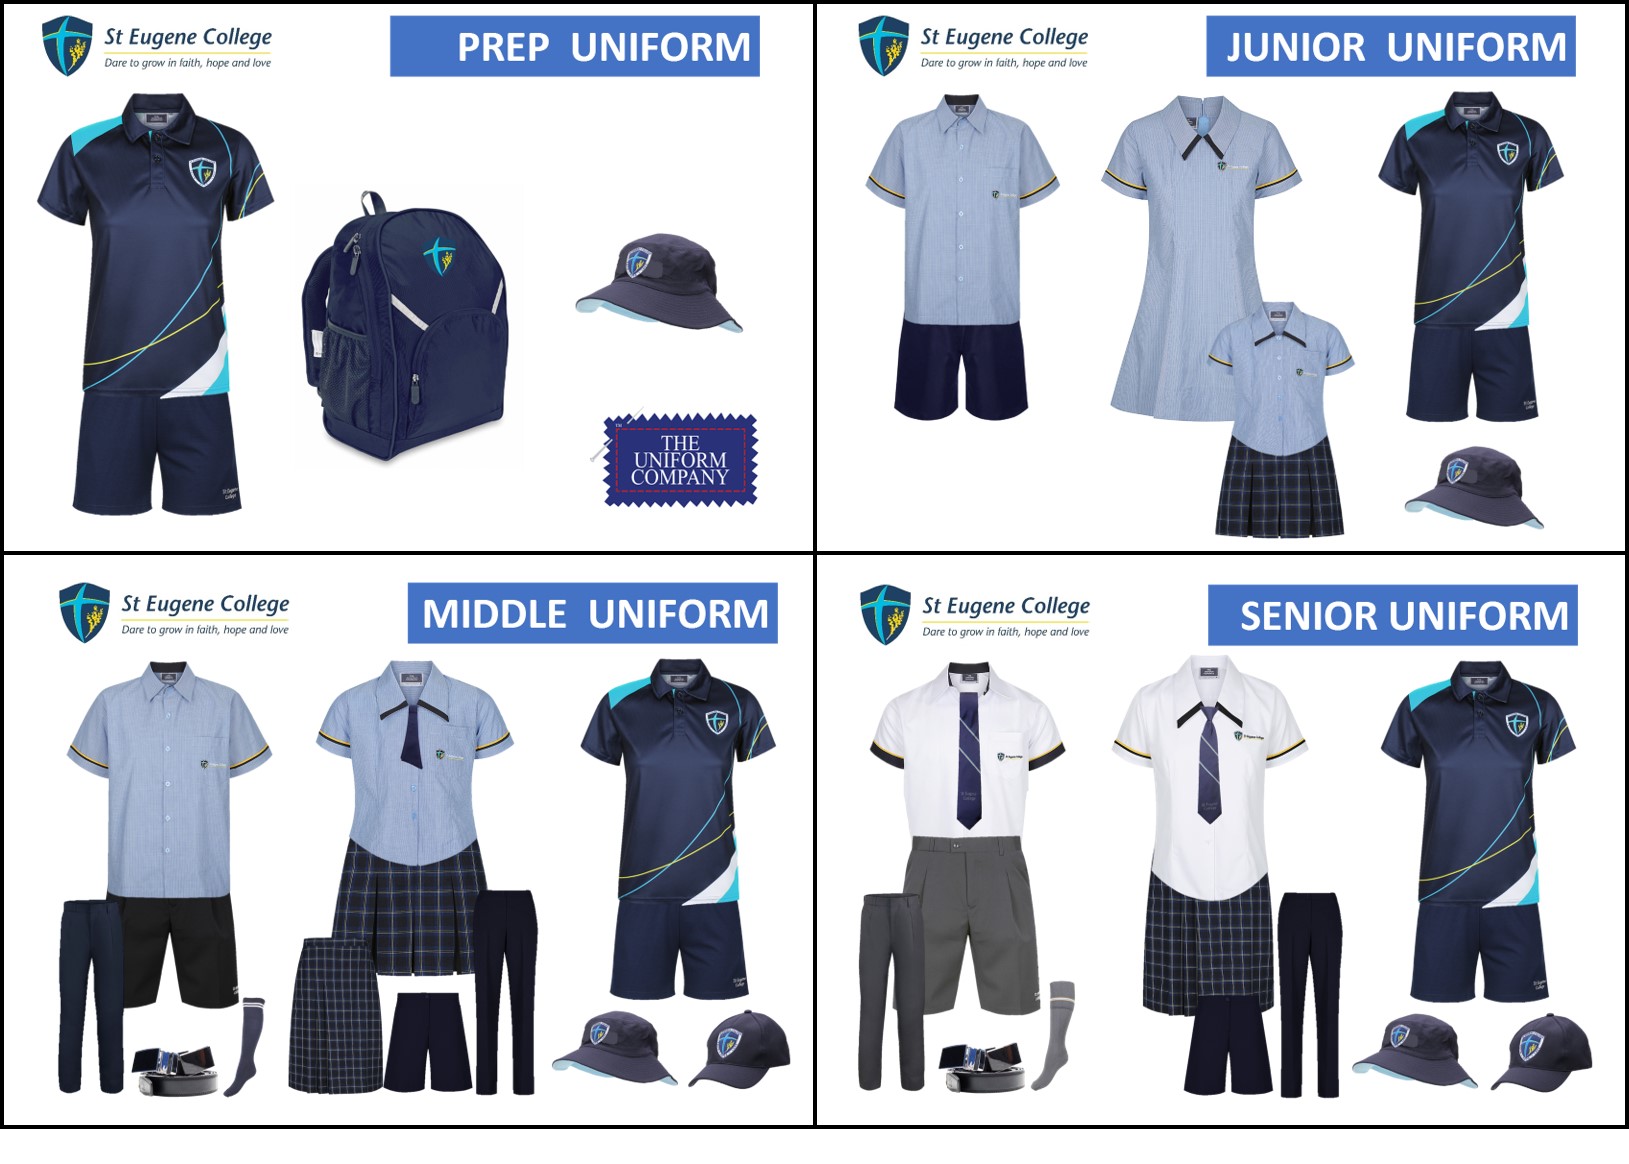 St Eugene Uniform in Pictures - All Years.jpg